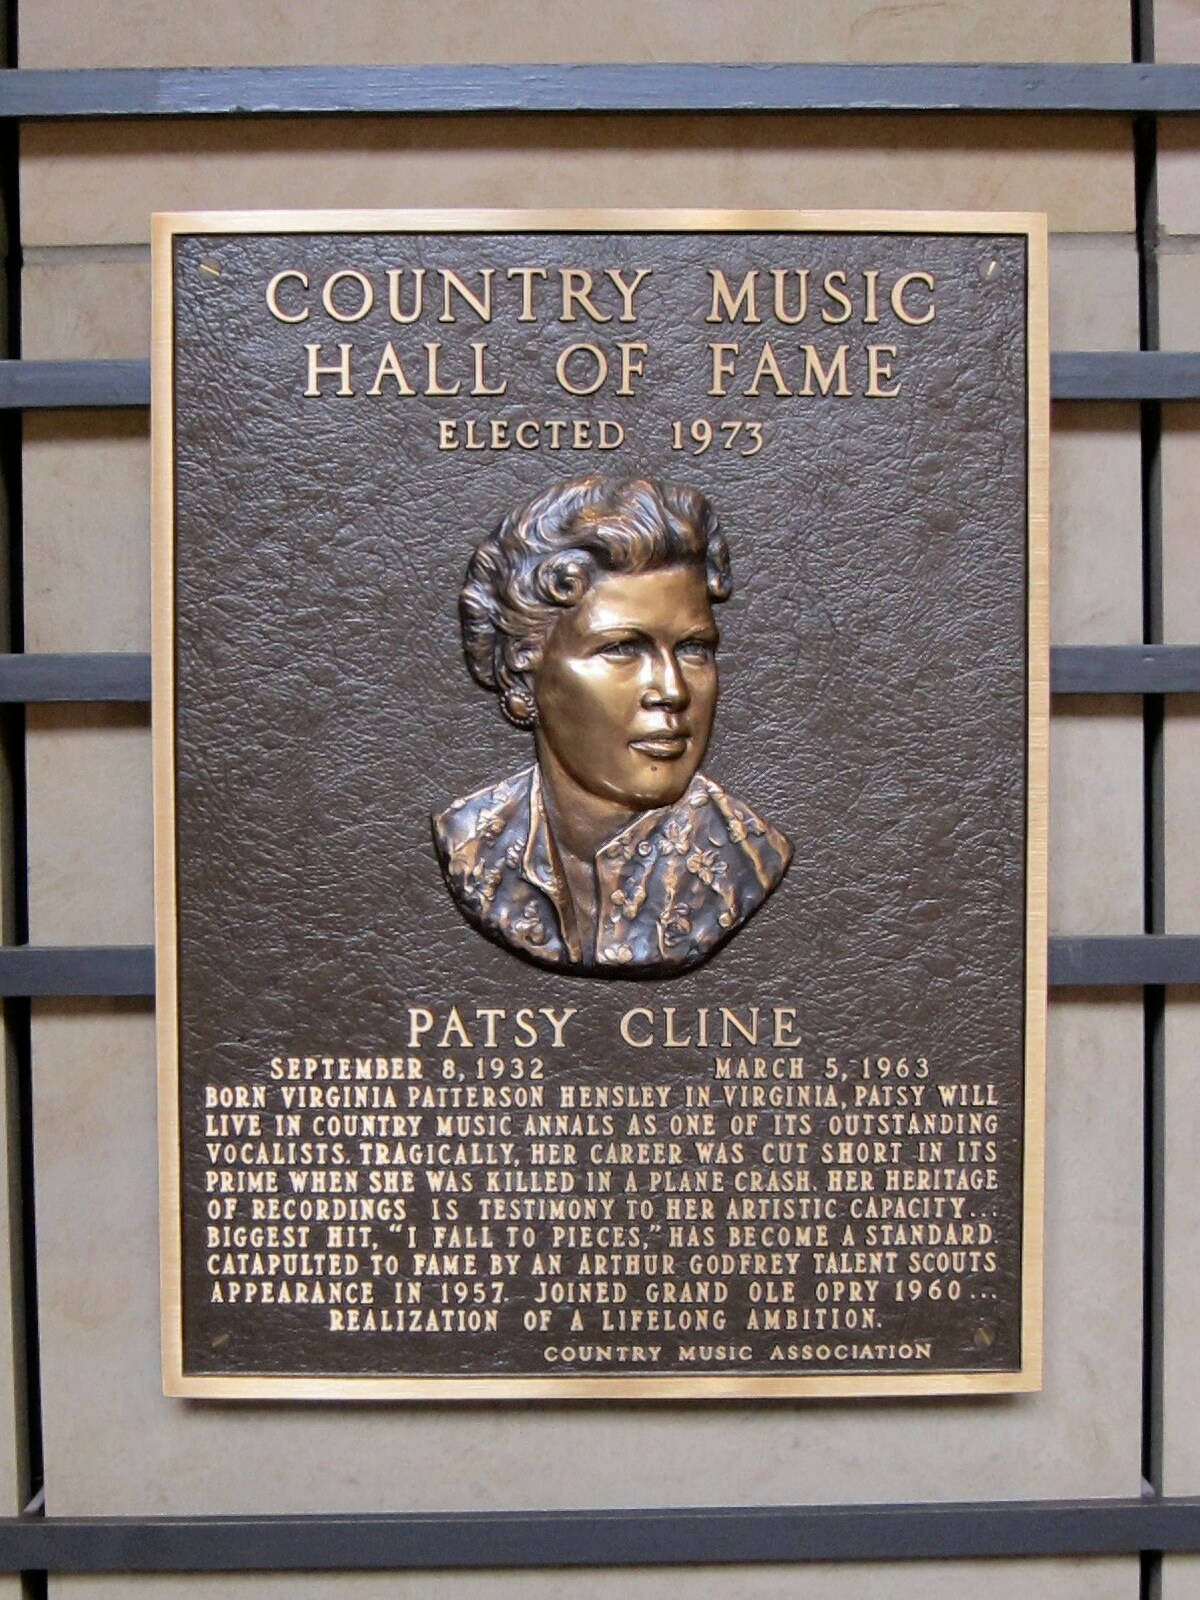 Countrymusic Hall Of Fame Patsy Cline - Country Musik Hall Of Fame Patsy Cline Wallpaper